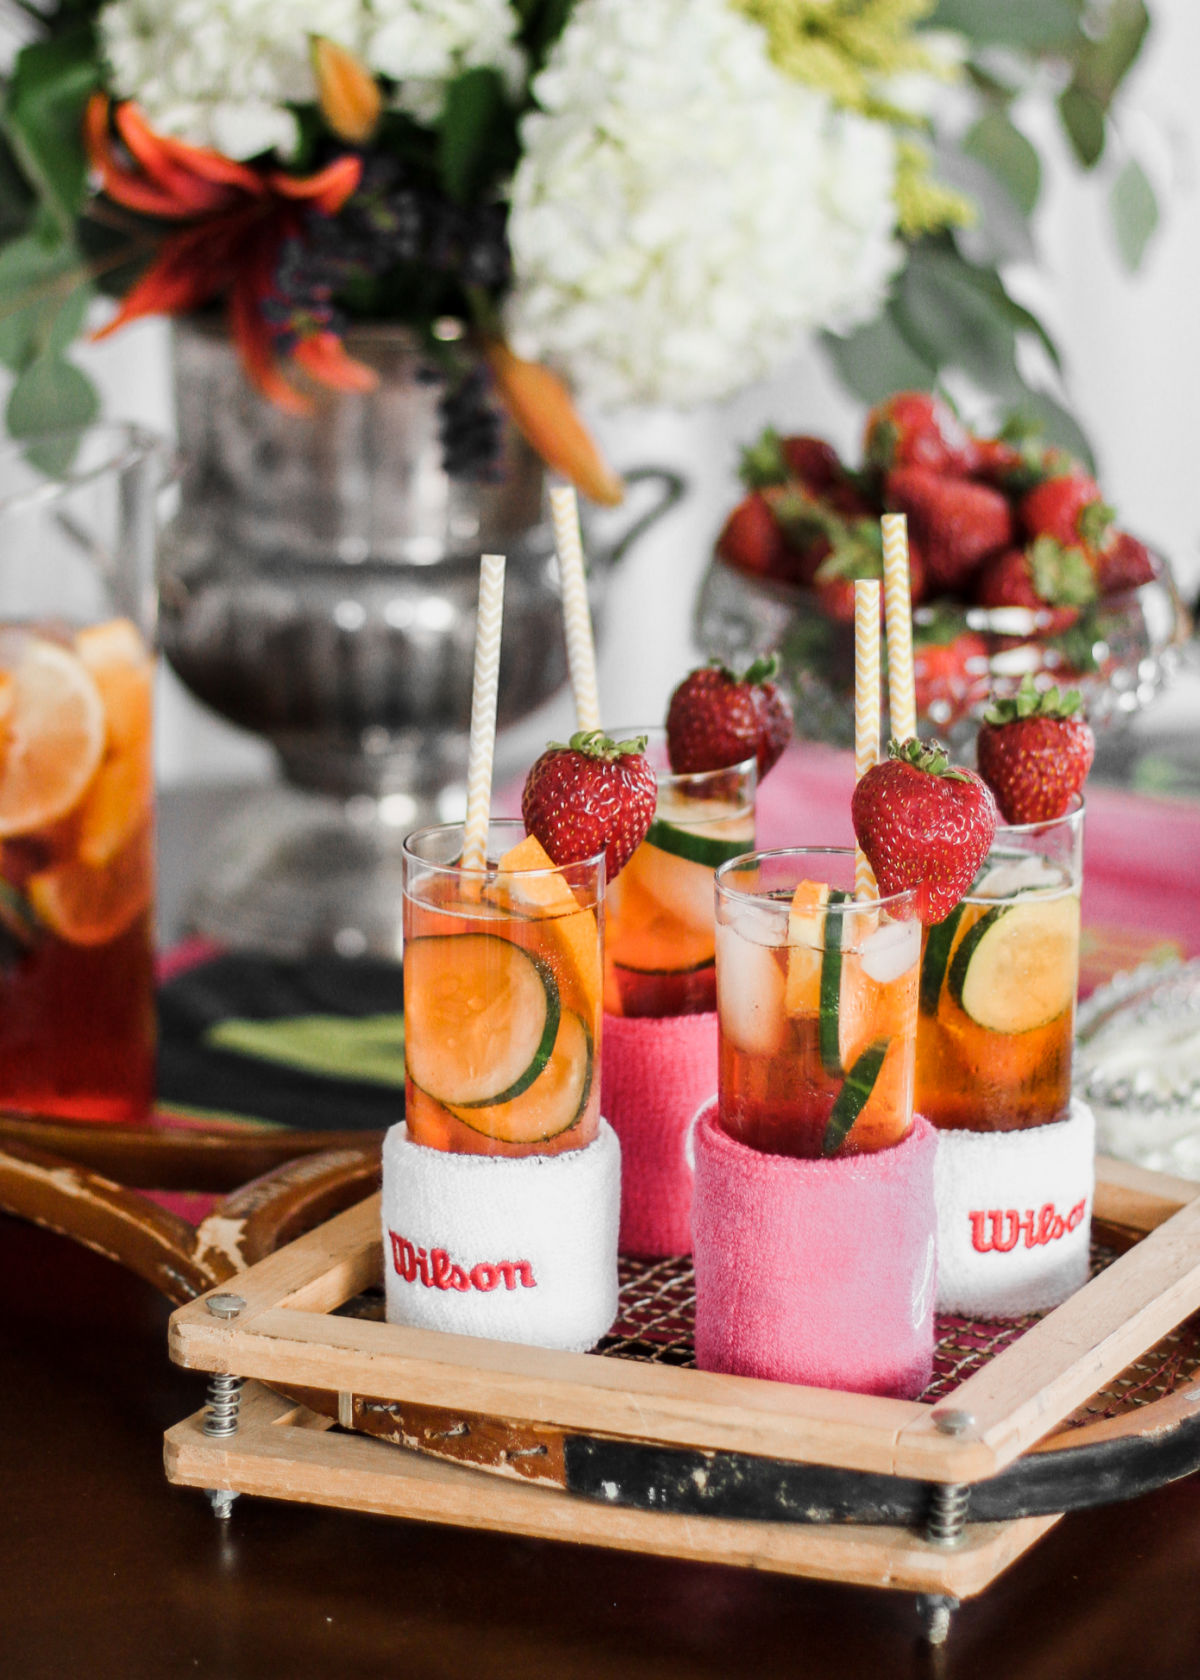 glasses of Pimms punch with wrist band holders for tennis decor.